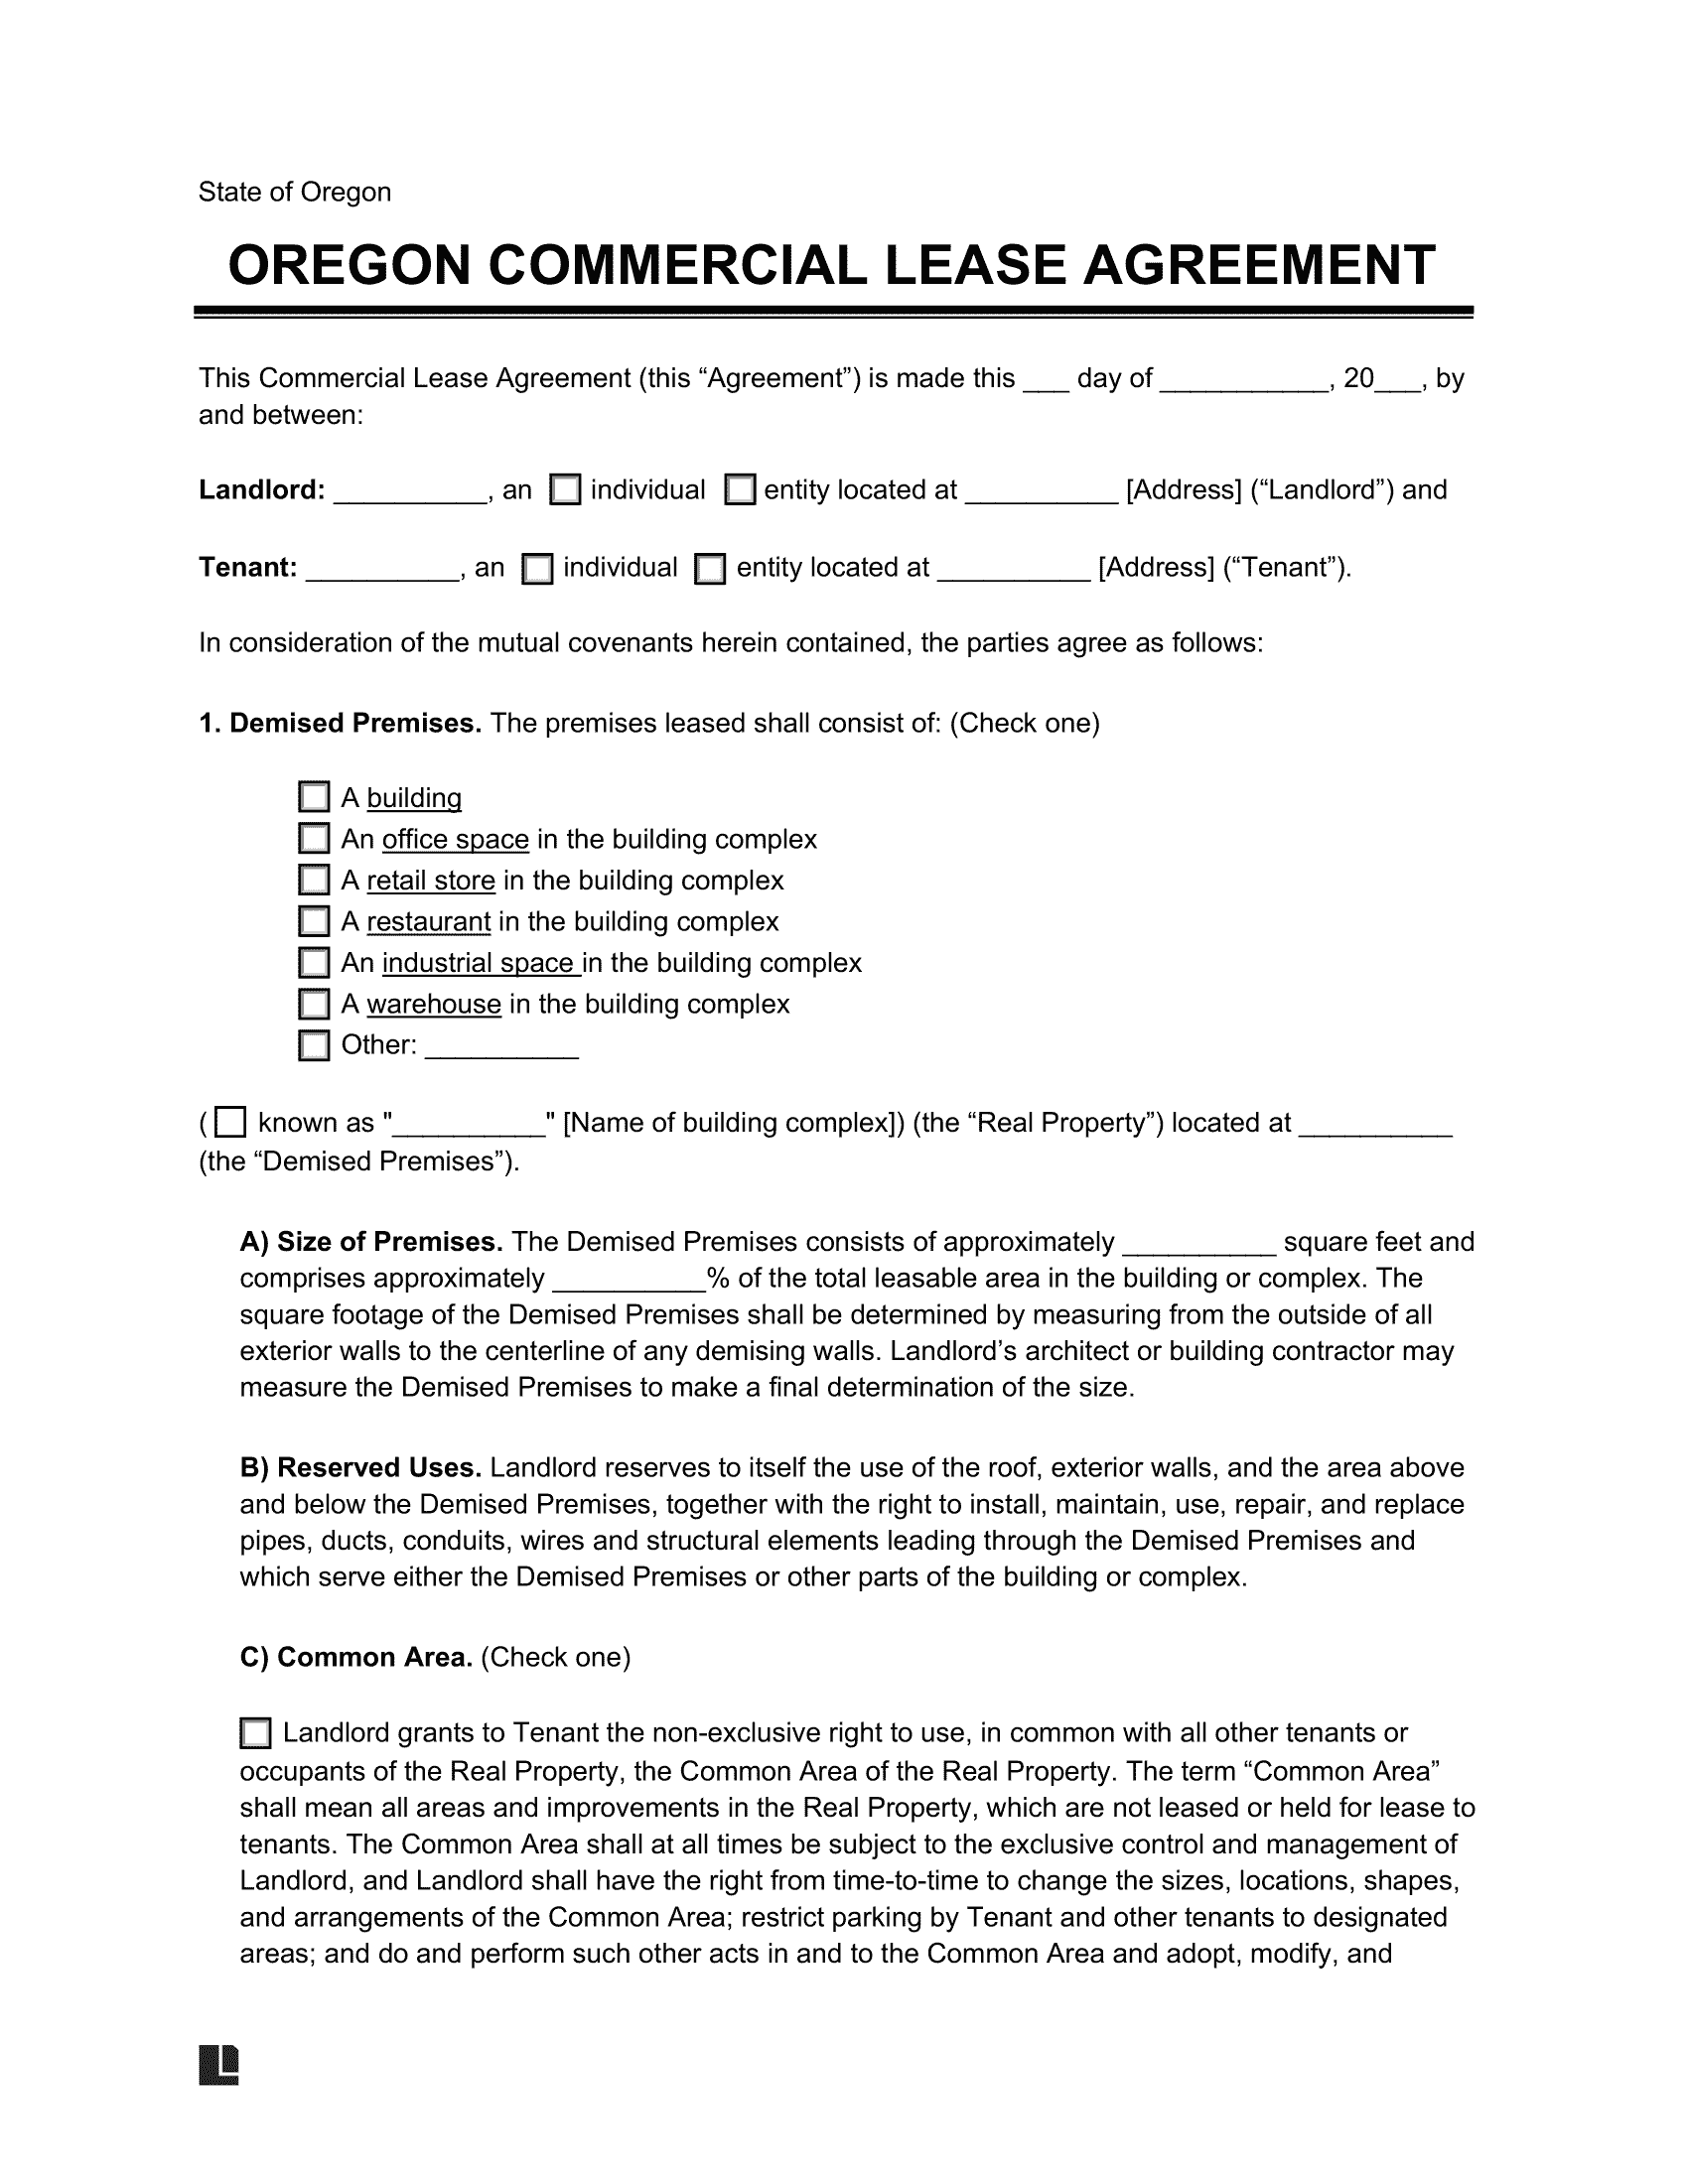 Oregon Commercial Lease Agreement